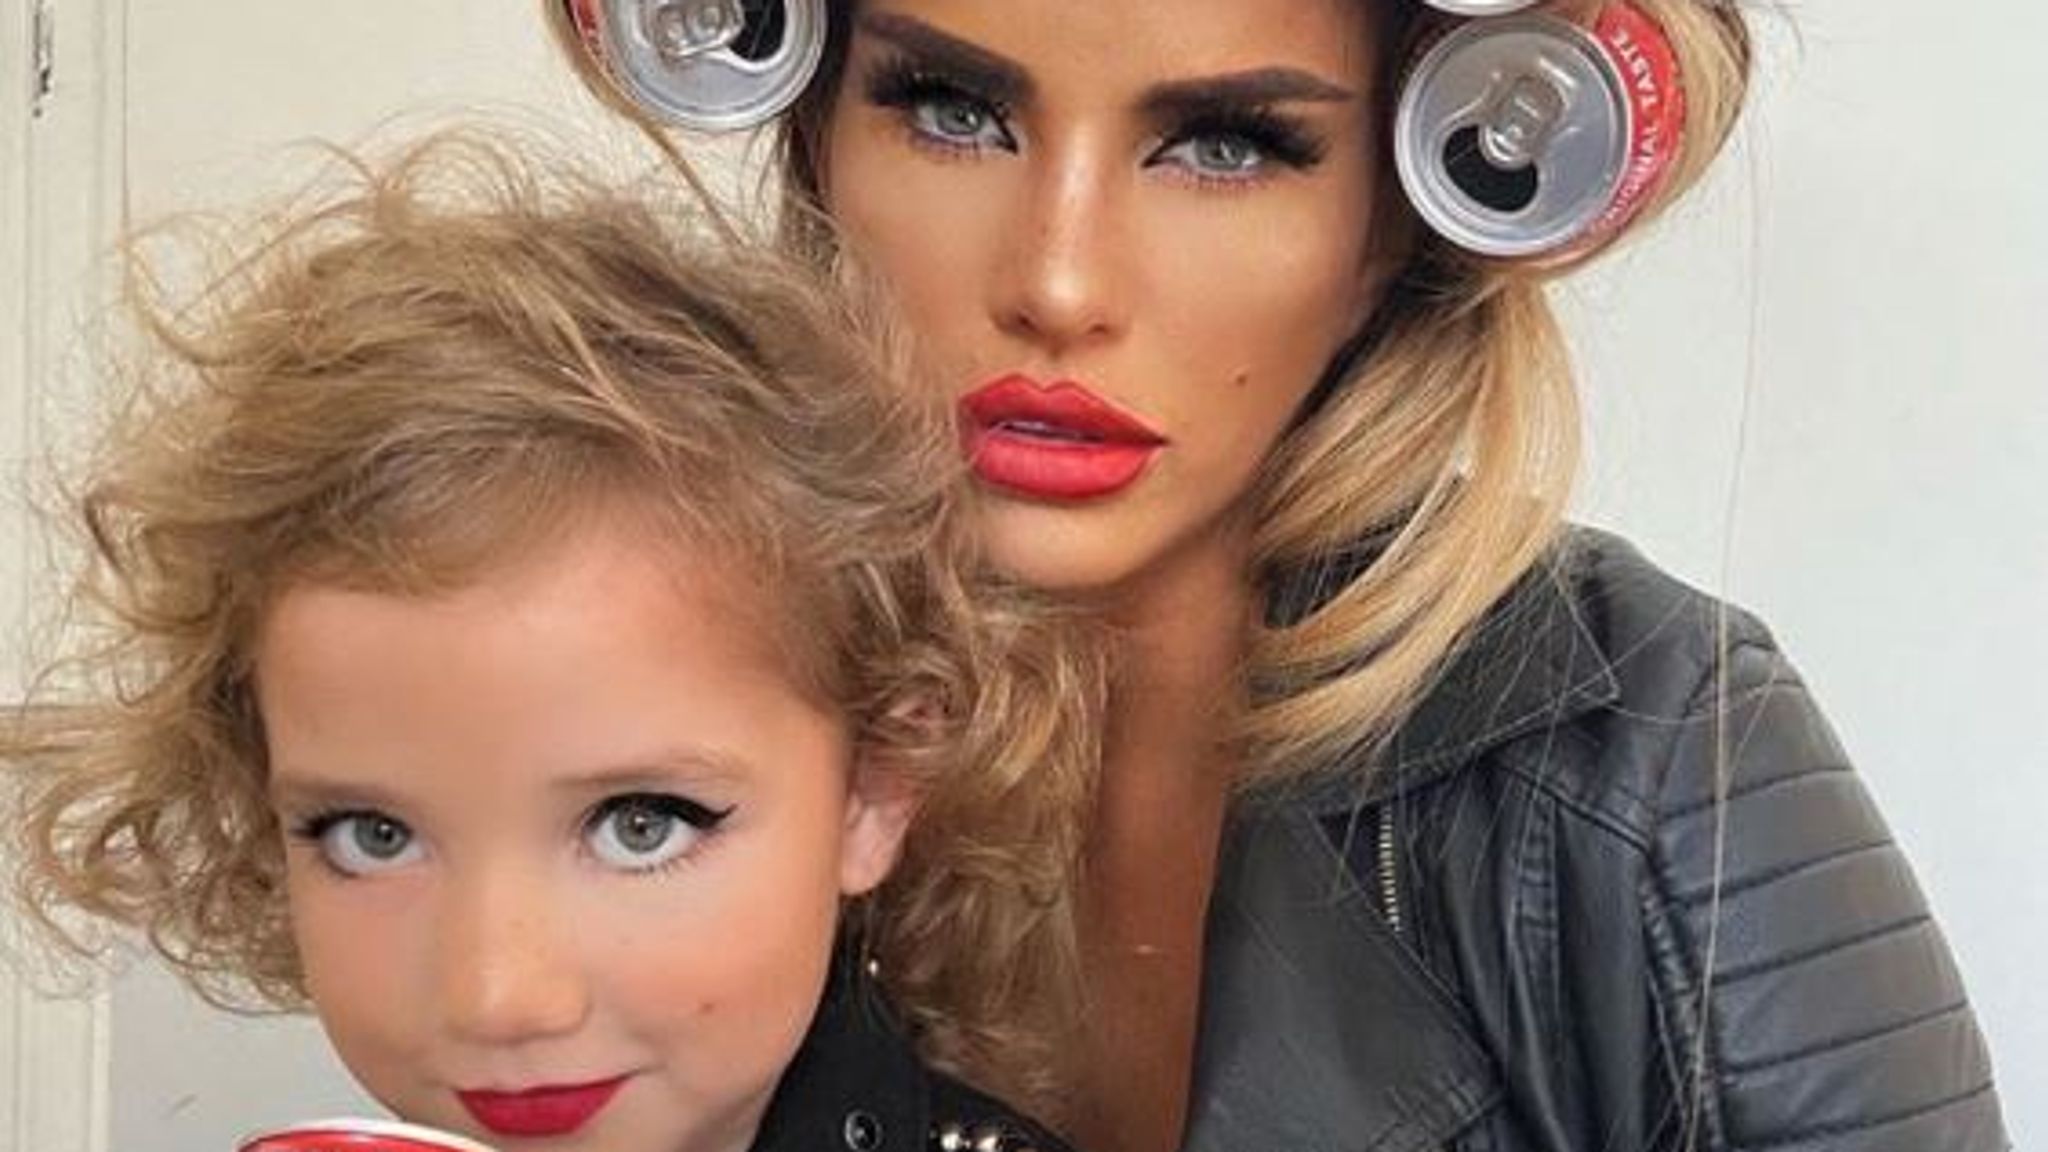 Katie Price Faces Backlash For Sharing Make Up Snaps Of Six Year Old Daughter Ents Arts News Sky News